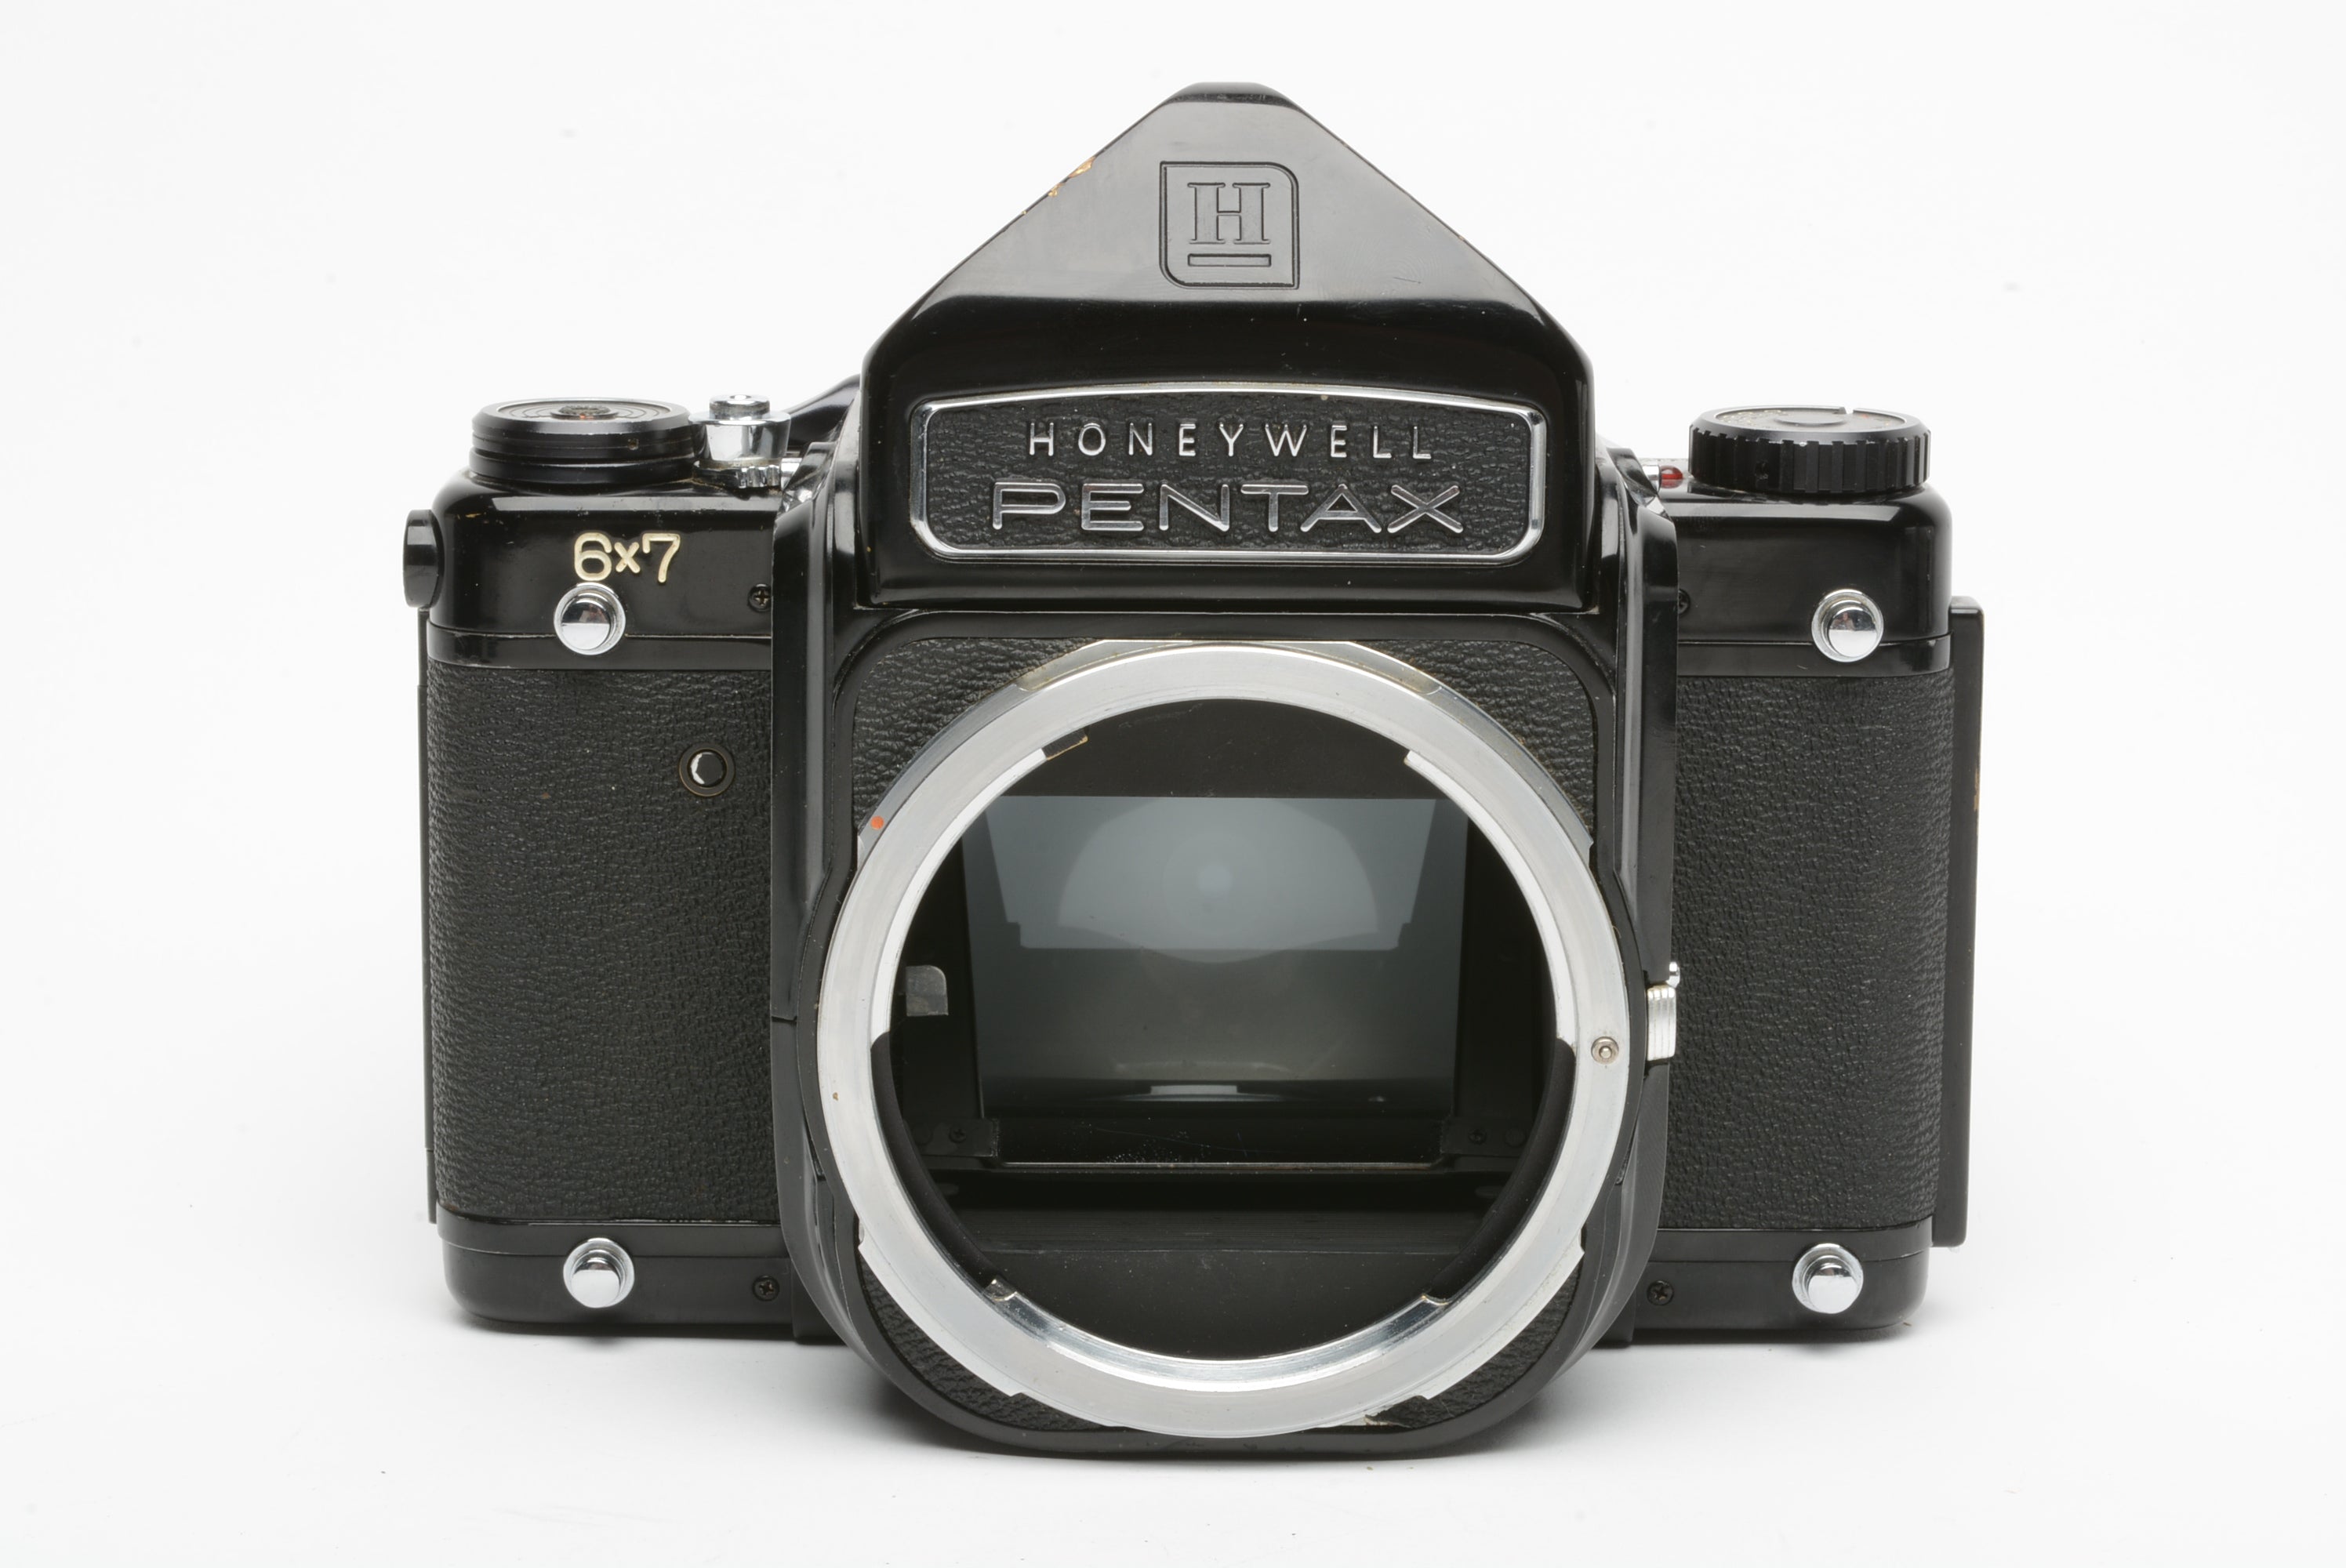 Pentax 67 Body w/prism finder and 3D grip, cap, tested, works 